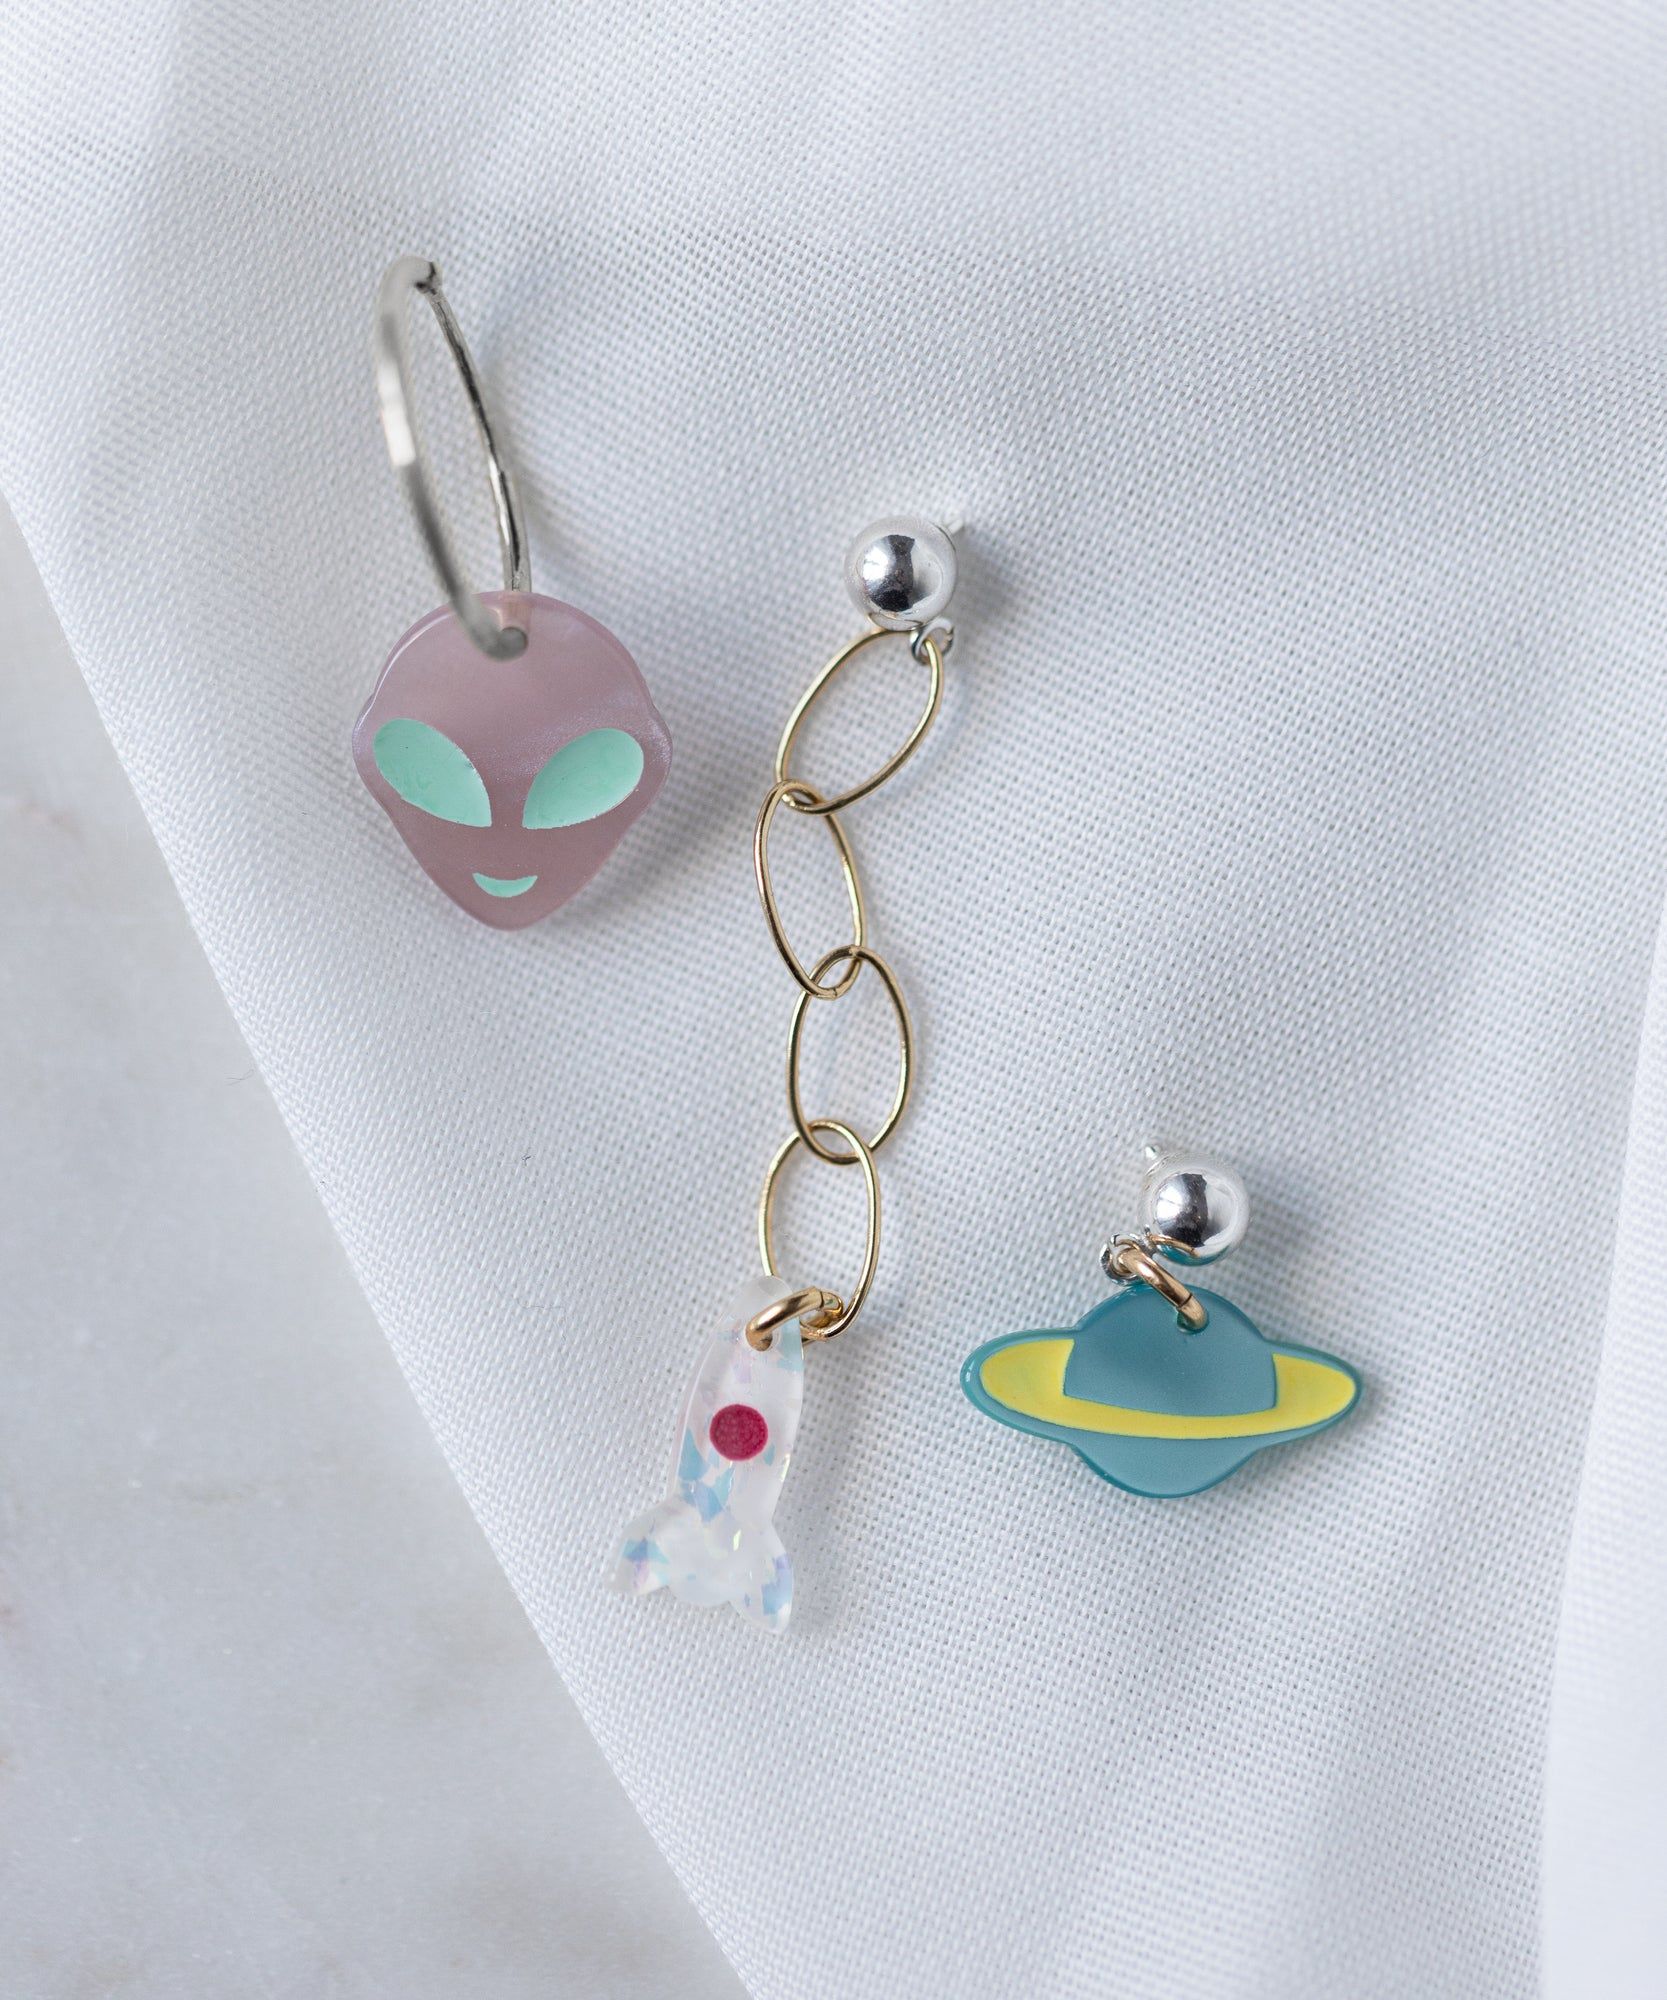 A pair of From Another Mother Galactic Earring Set earrings with aliens and planets on them from WALD Berlin.